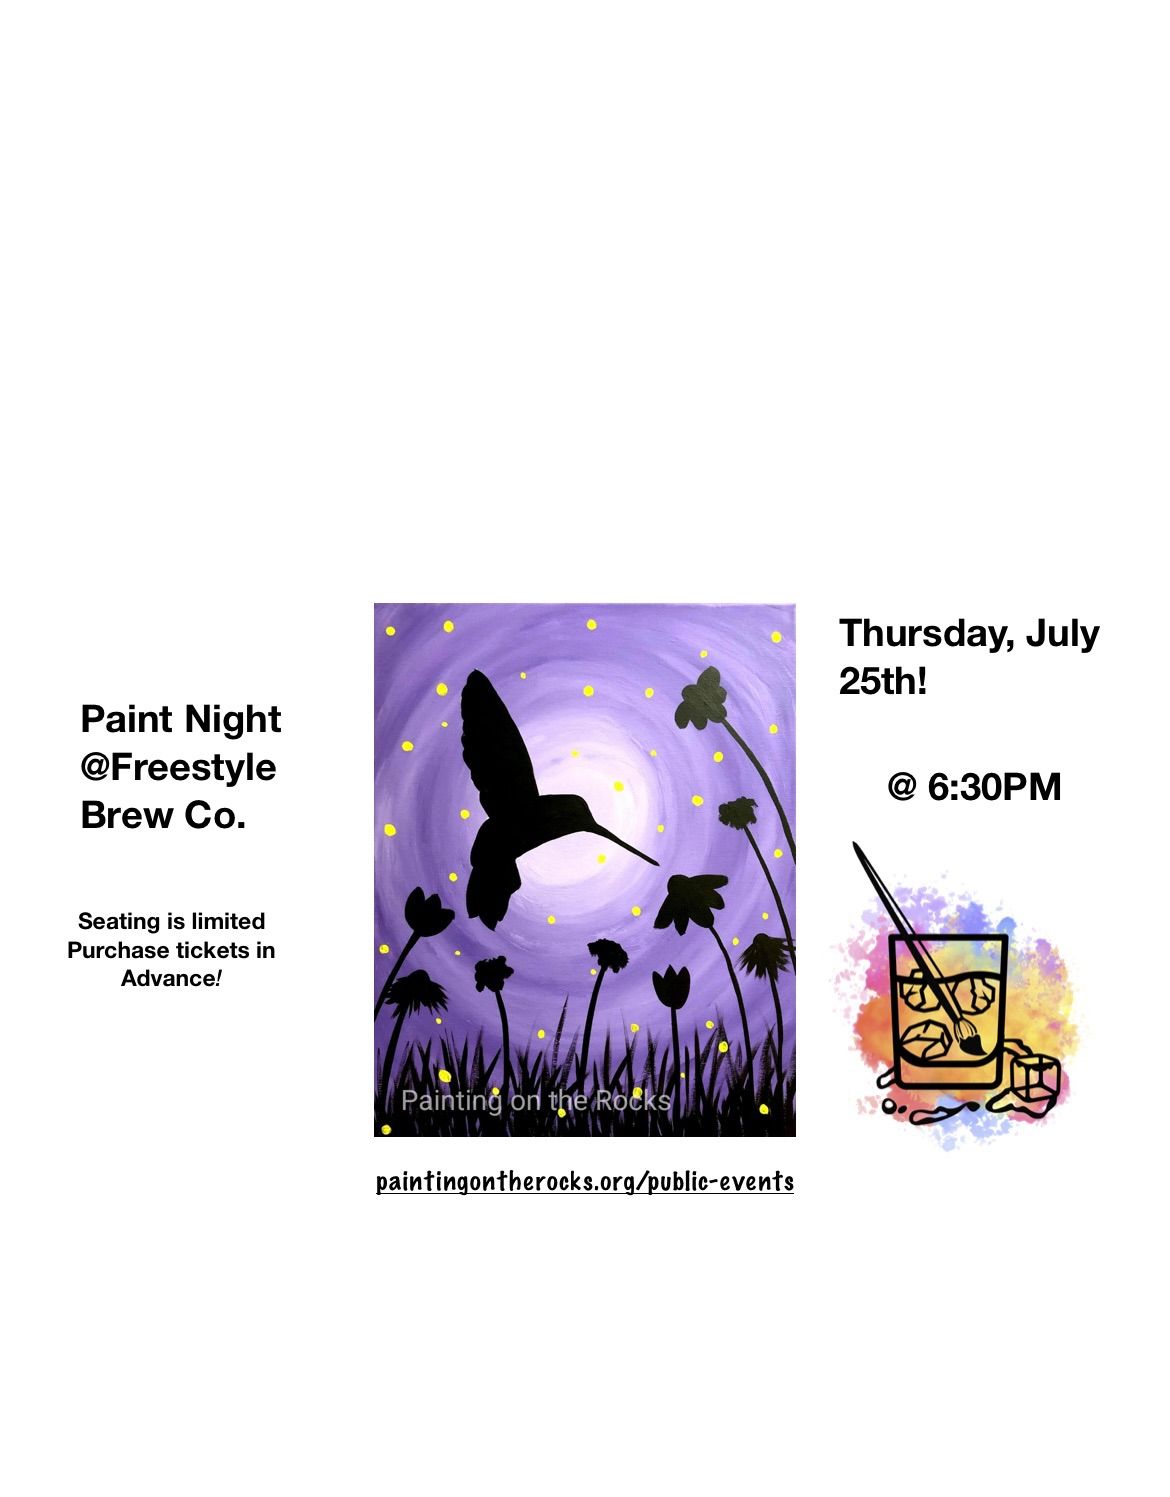 Paint Night @ Freestyle Brew Co.